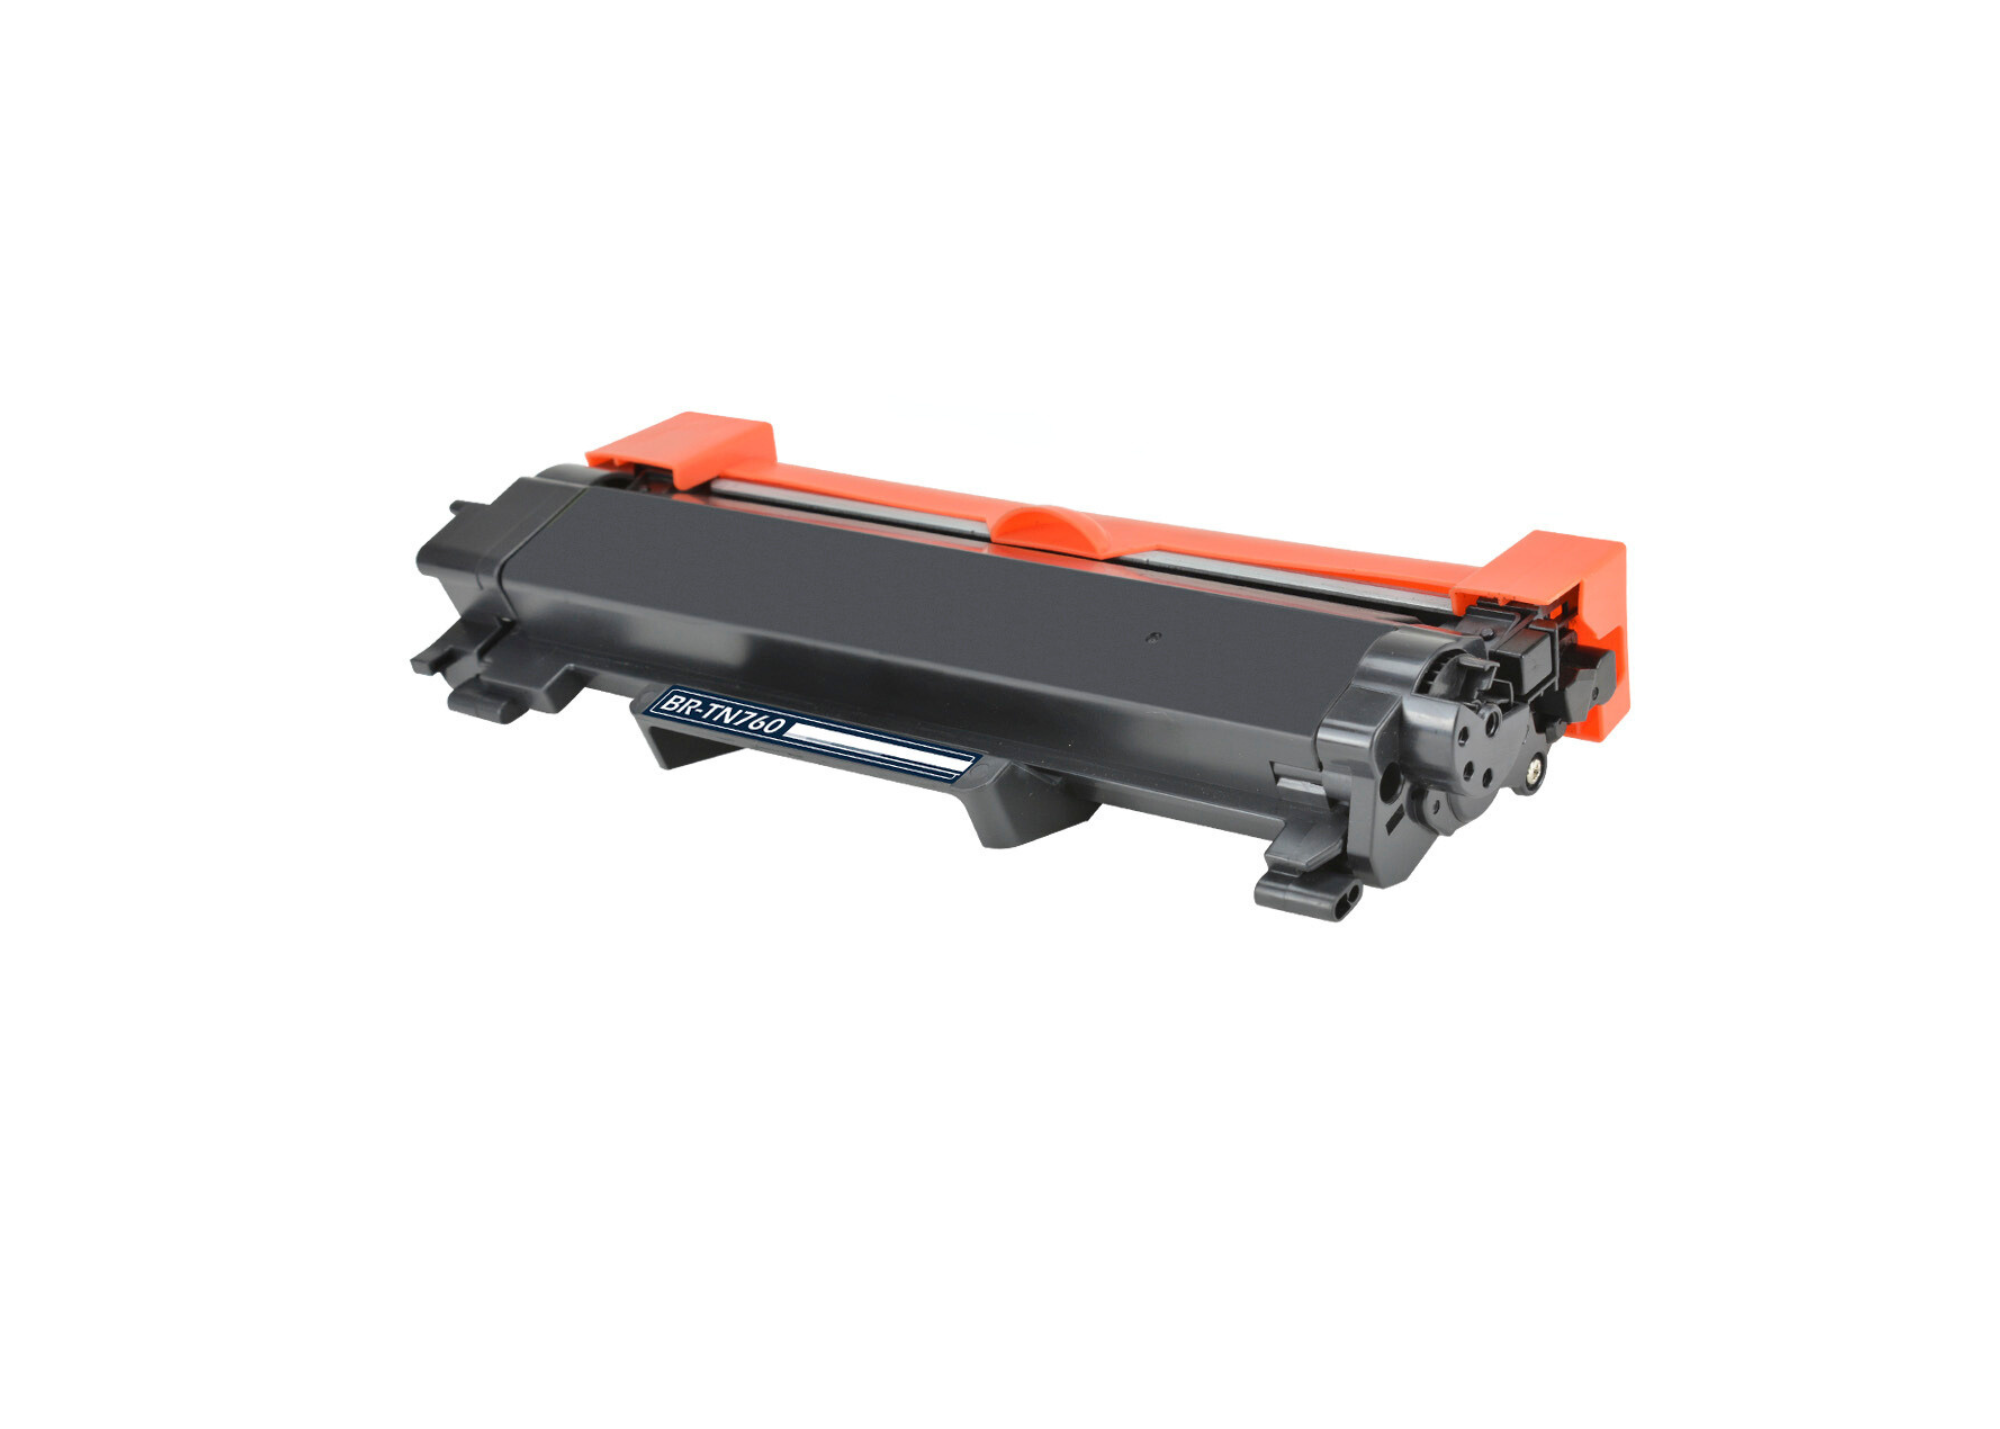 Brother TN760 (Replaces TN730) Black High-Yield Compatible Toner